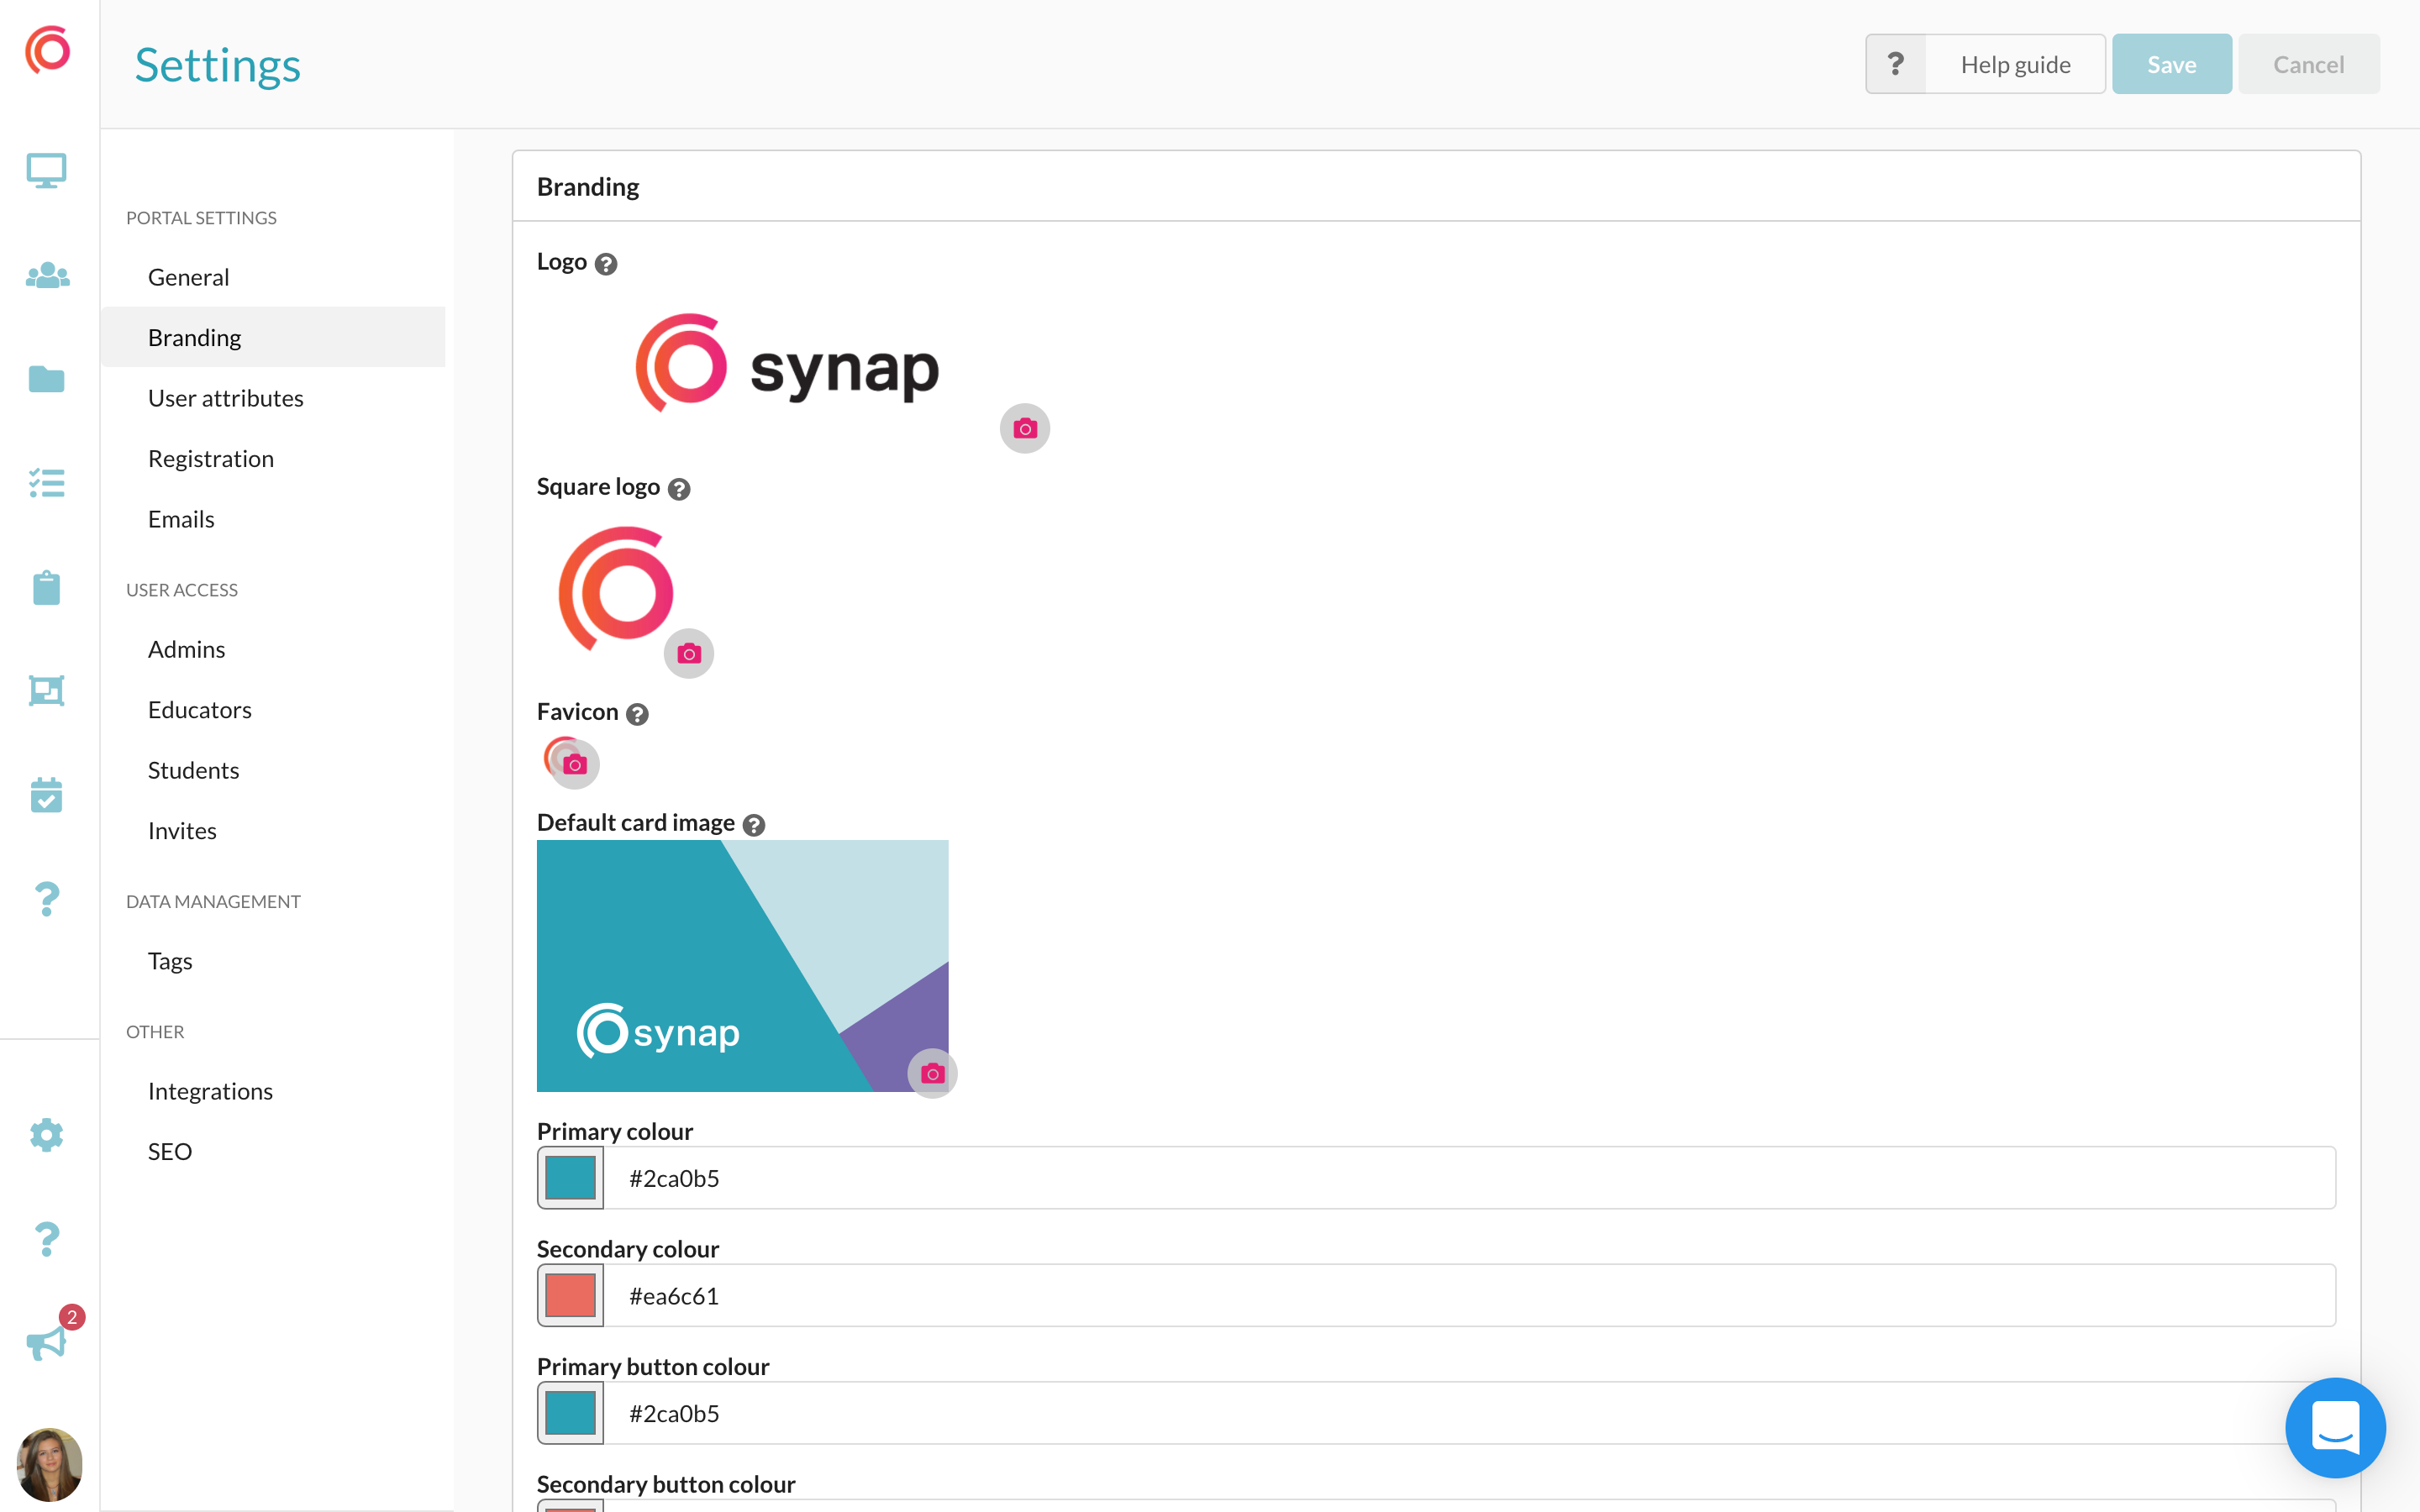 Synap Software - Make the platform your own with custom branding, such as adding your own company logo, colours and images